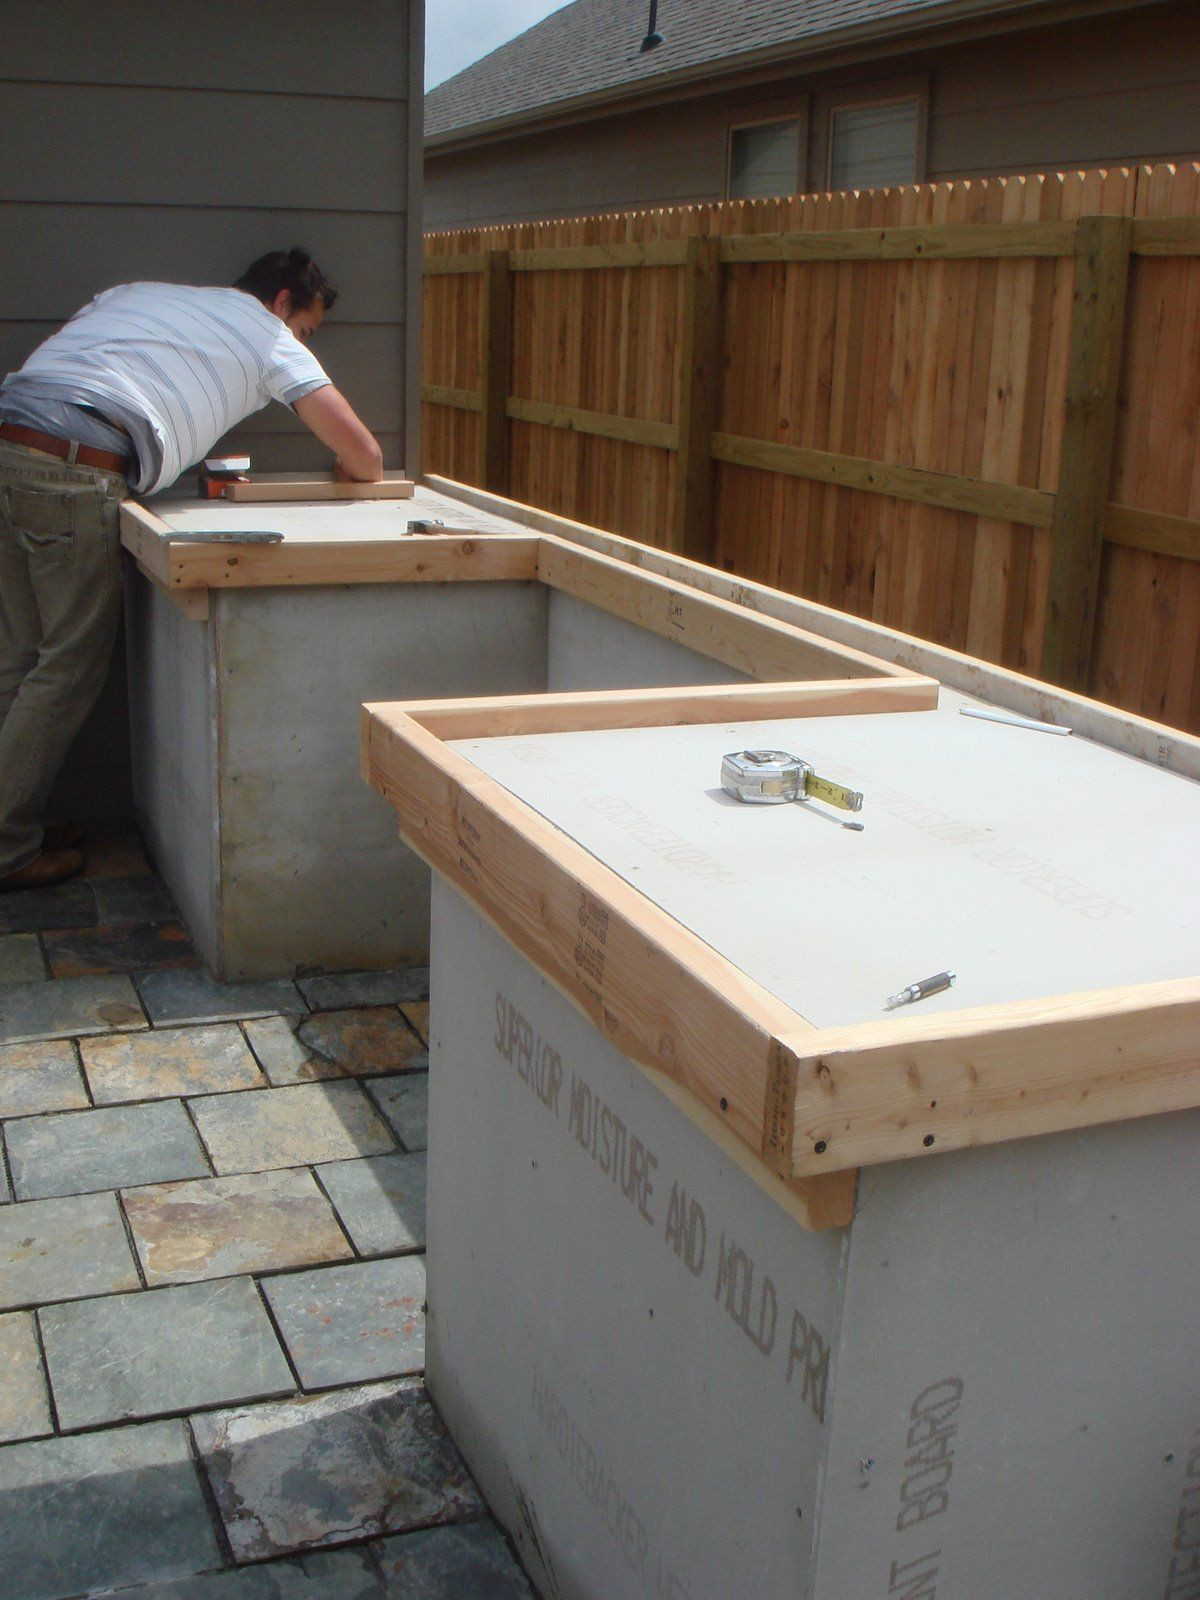 DIY Outdoor Countertop Ideas
 How to Build Outdoor Kitchen Cabinets